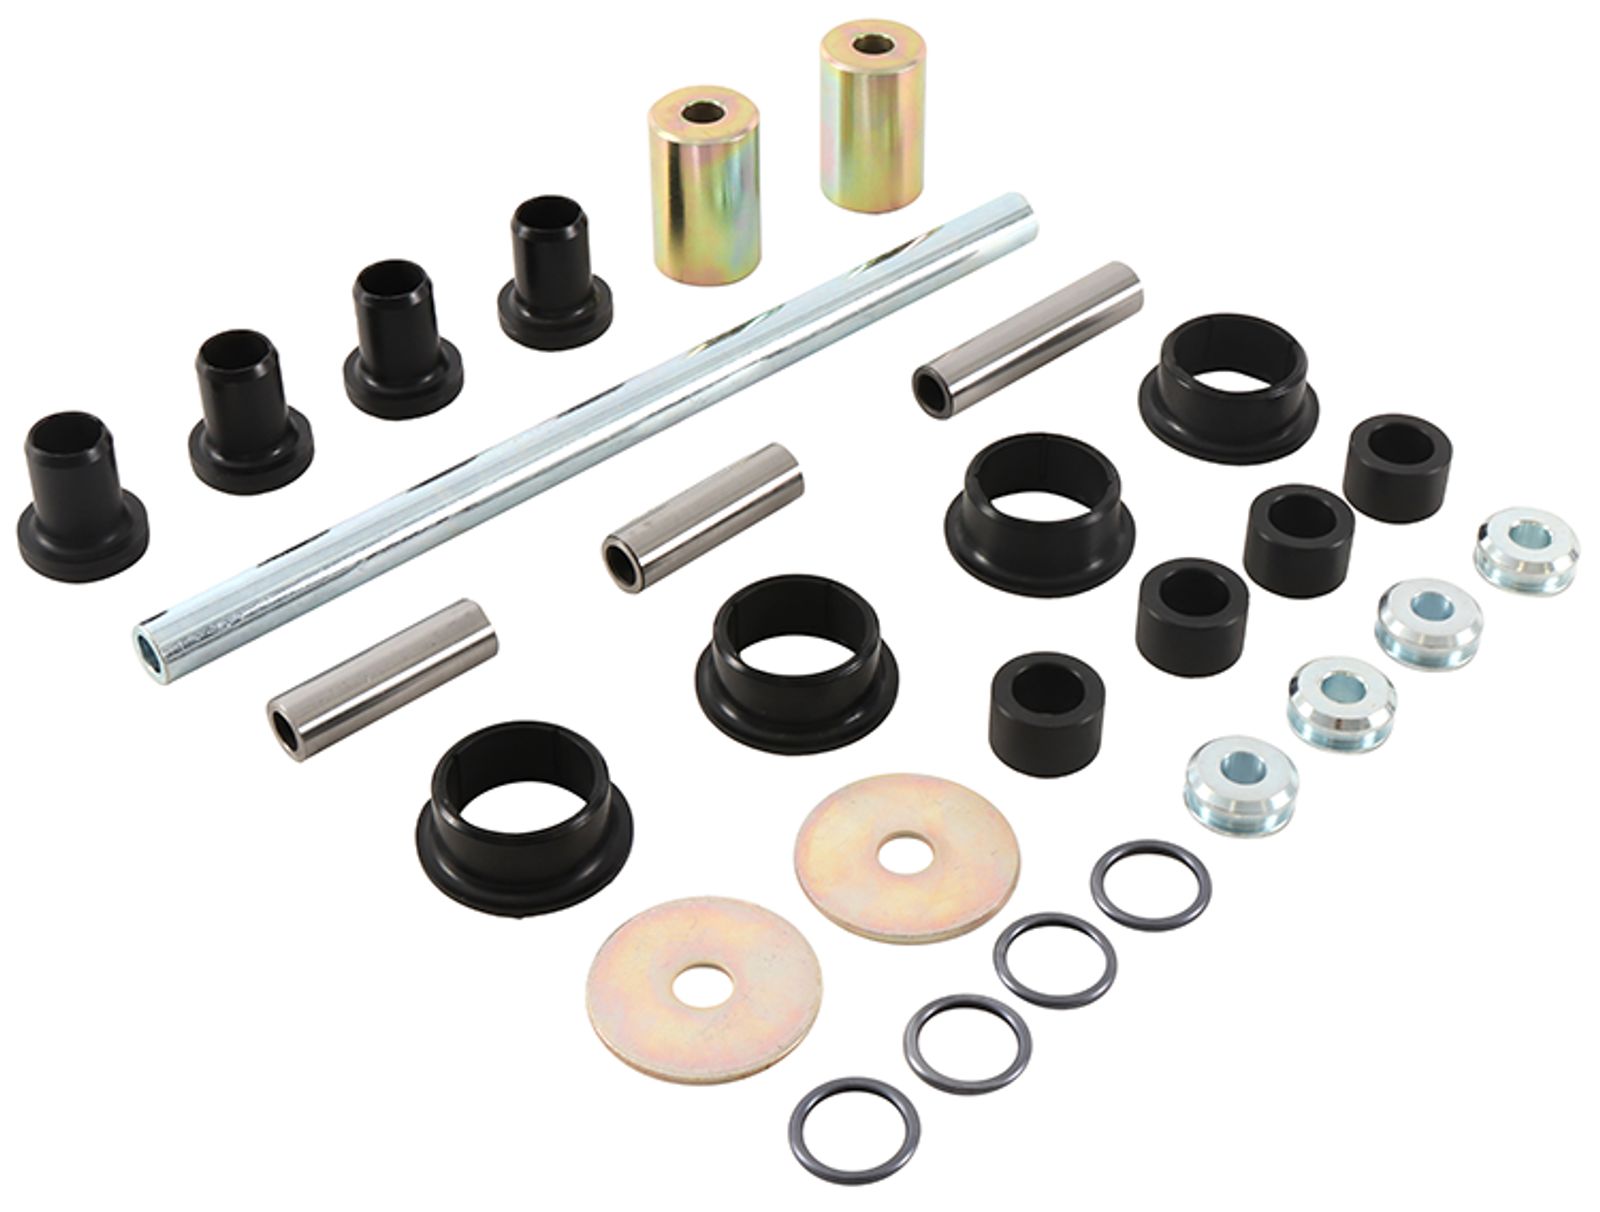 Wrp Rear Ind. Suspension Kits - WRP501199 image